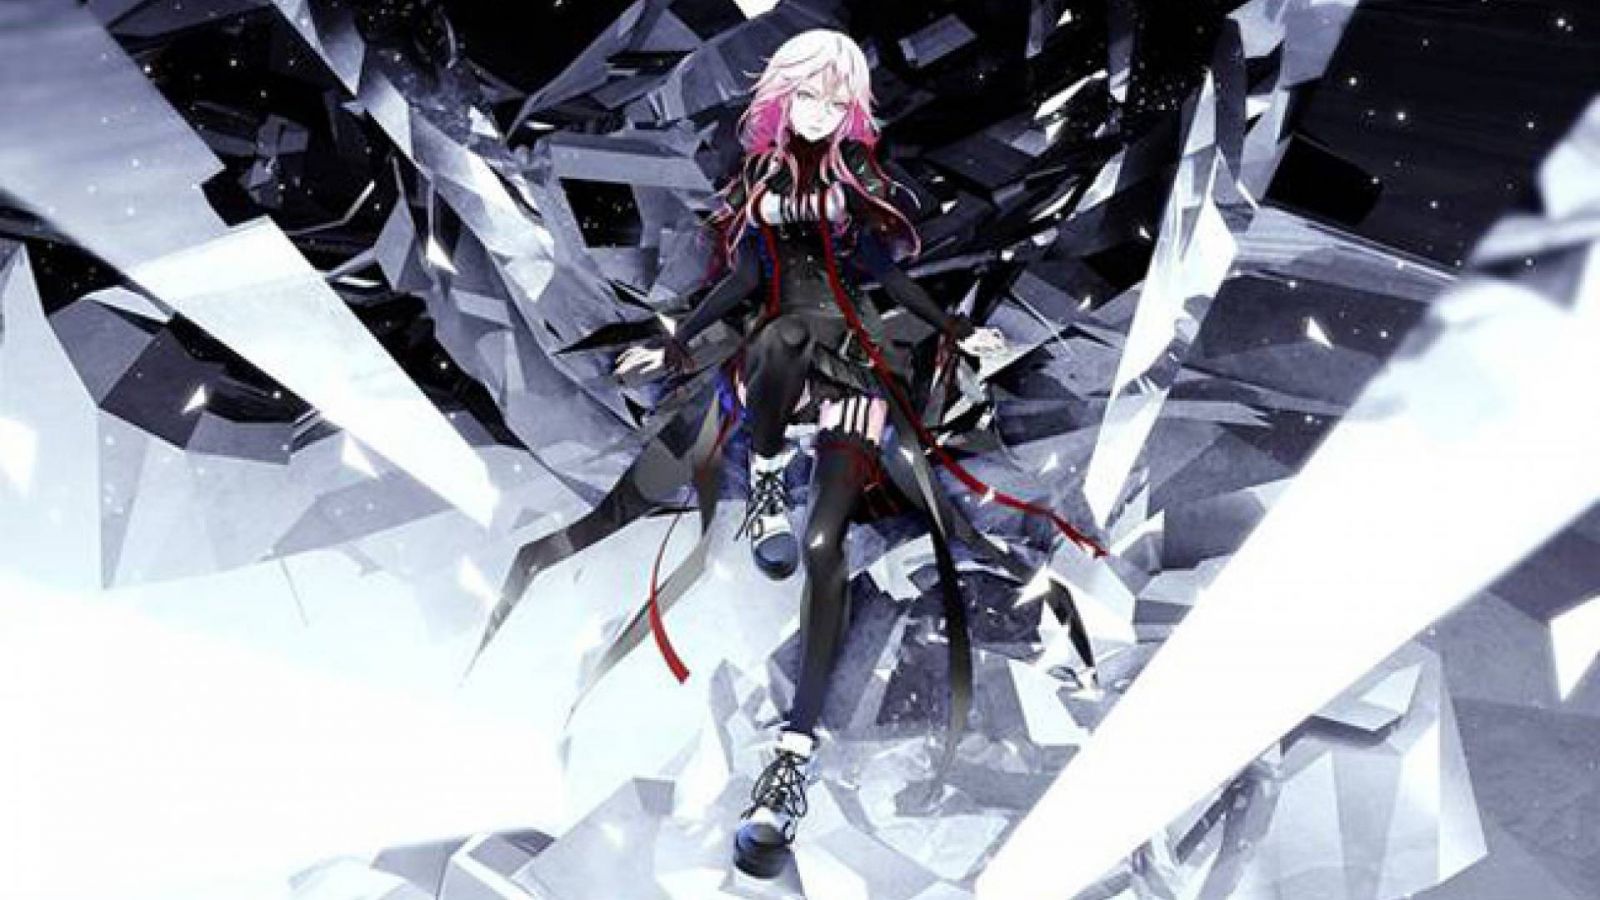 EGOIST © Sony Music Entertainment (Japan) Inc. All rights reserved.